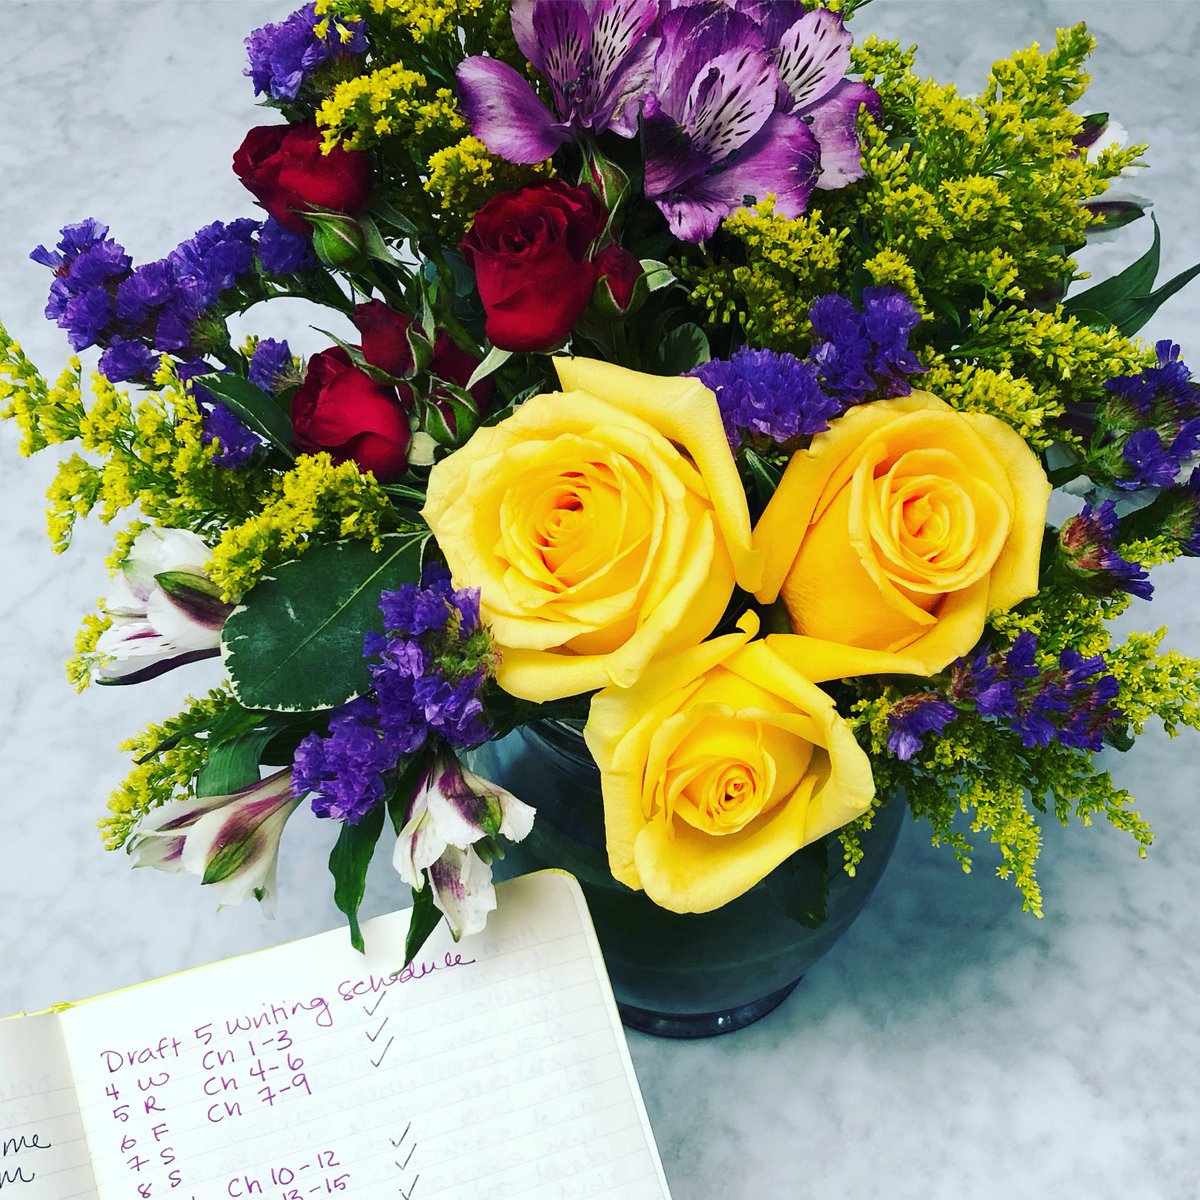 He said, “You did it!” Writing a novel is a long endeavor. I am so grateful to have a partner who witnesses my creative journey. #writerslife #flowerdelivery #celebrateeverystep